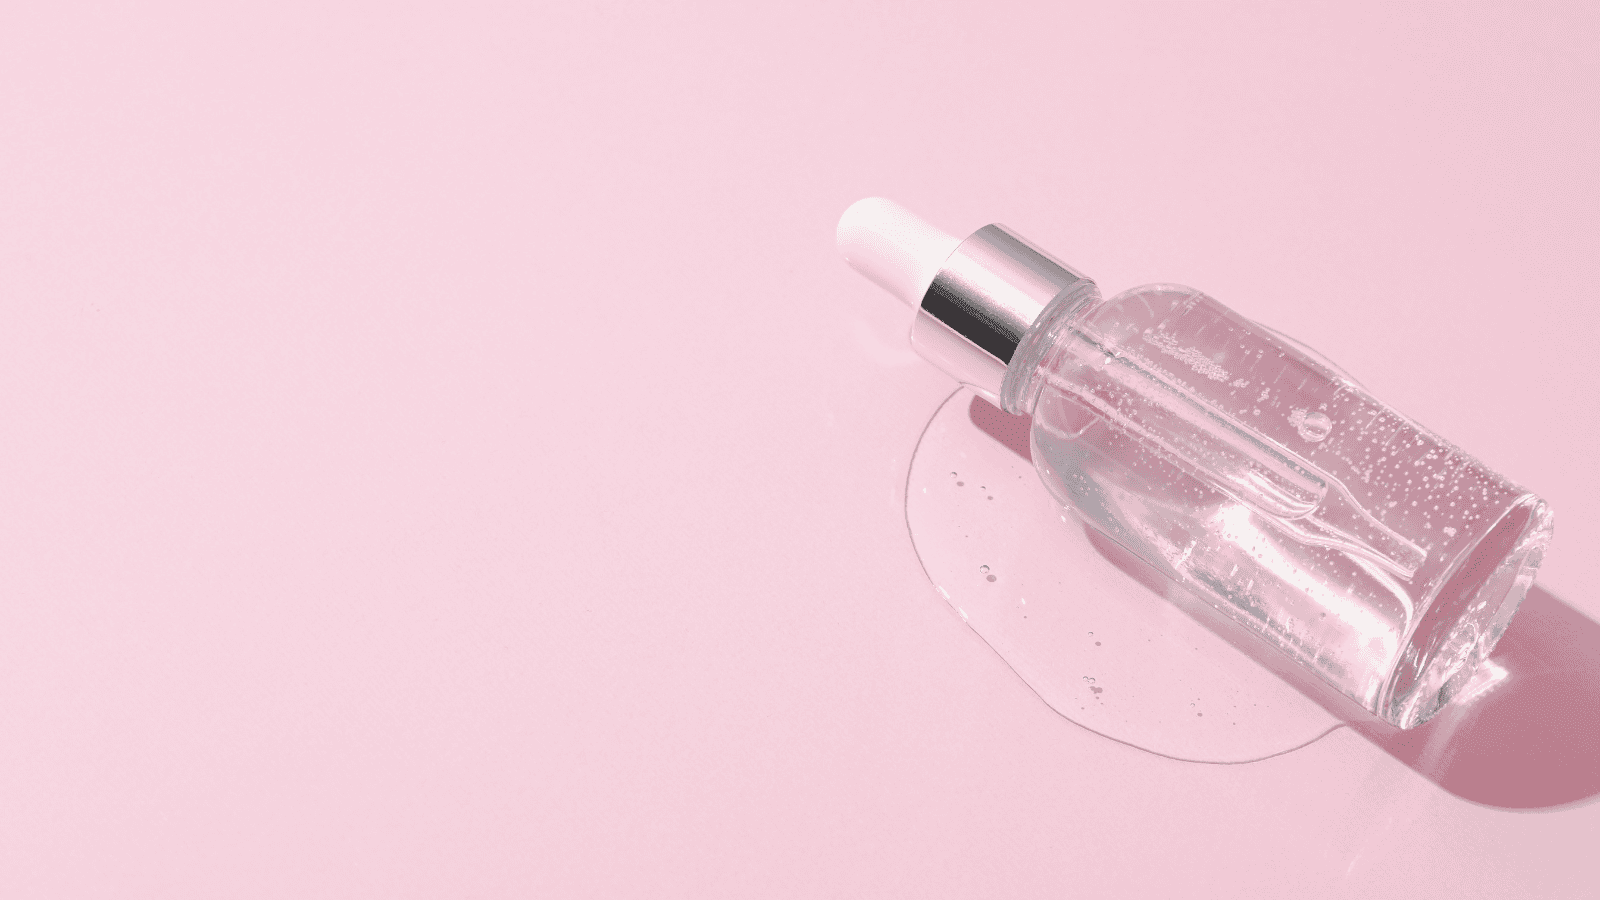 Anti-aging serums to look younger